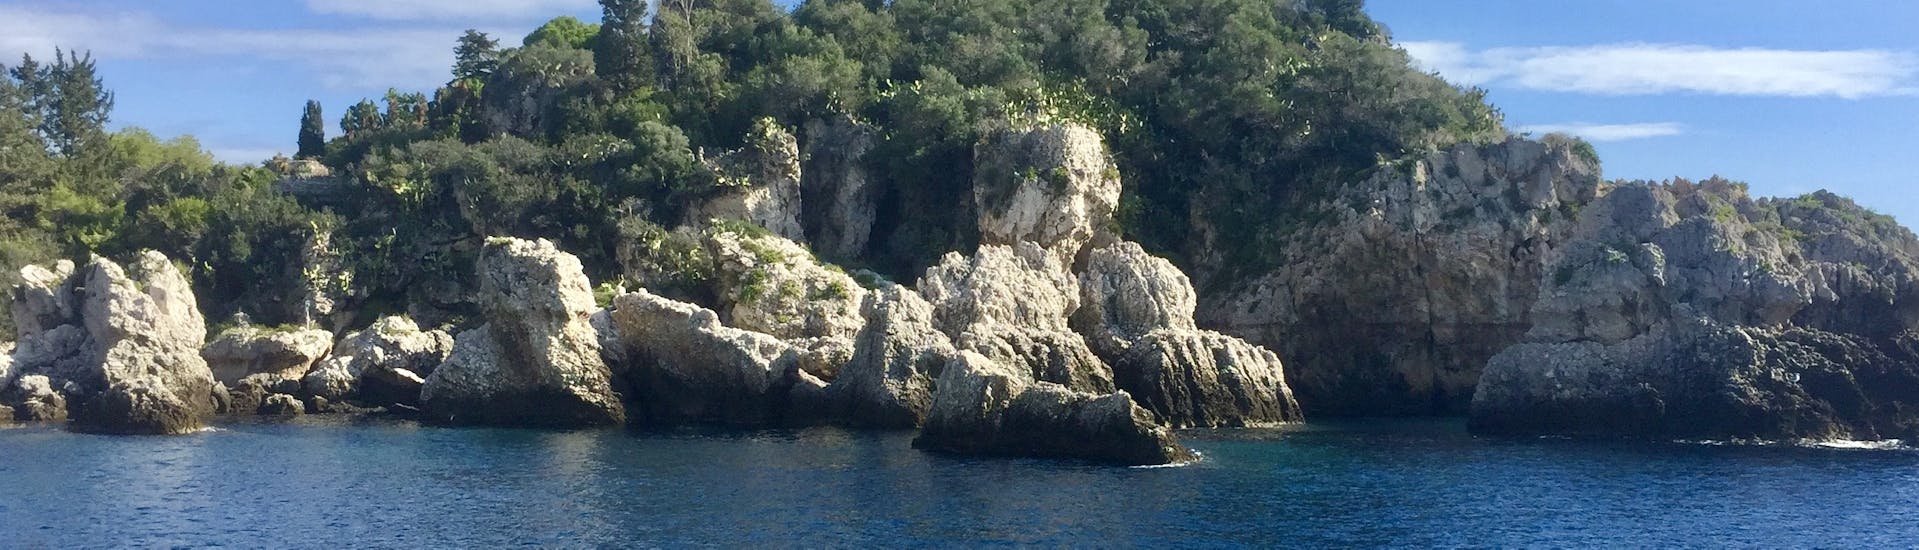 A rocky formation you can see during the Boat Trip to Taormina & Isola Bella with Snorkeling with SAT Group Excursions Taormina.